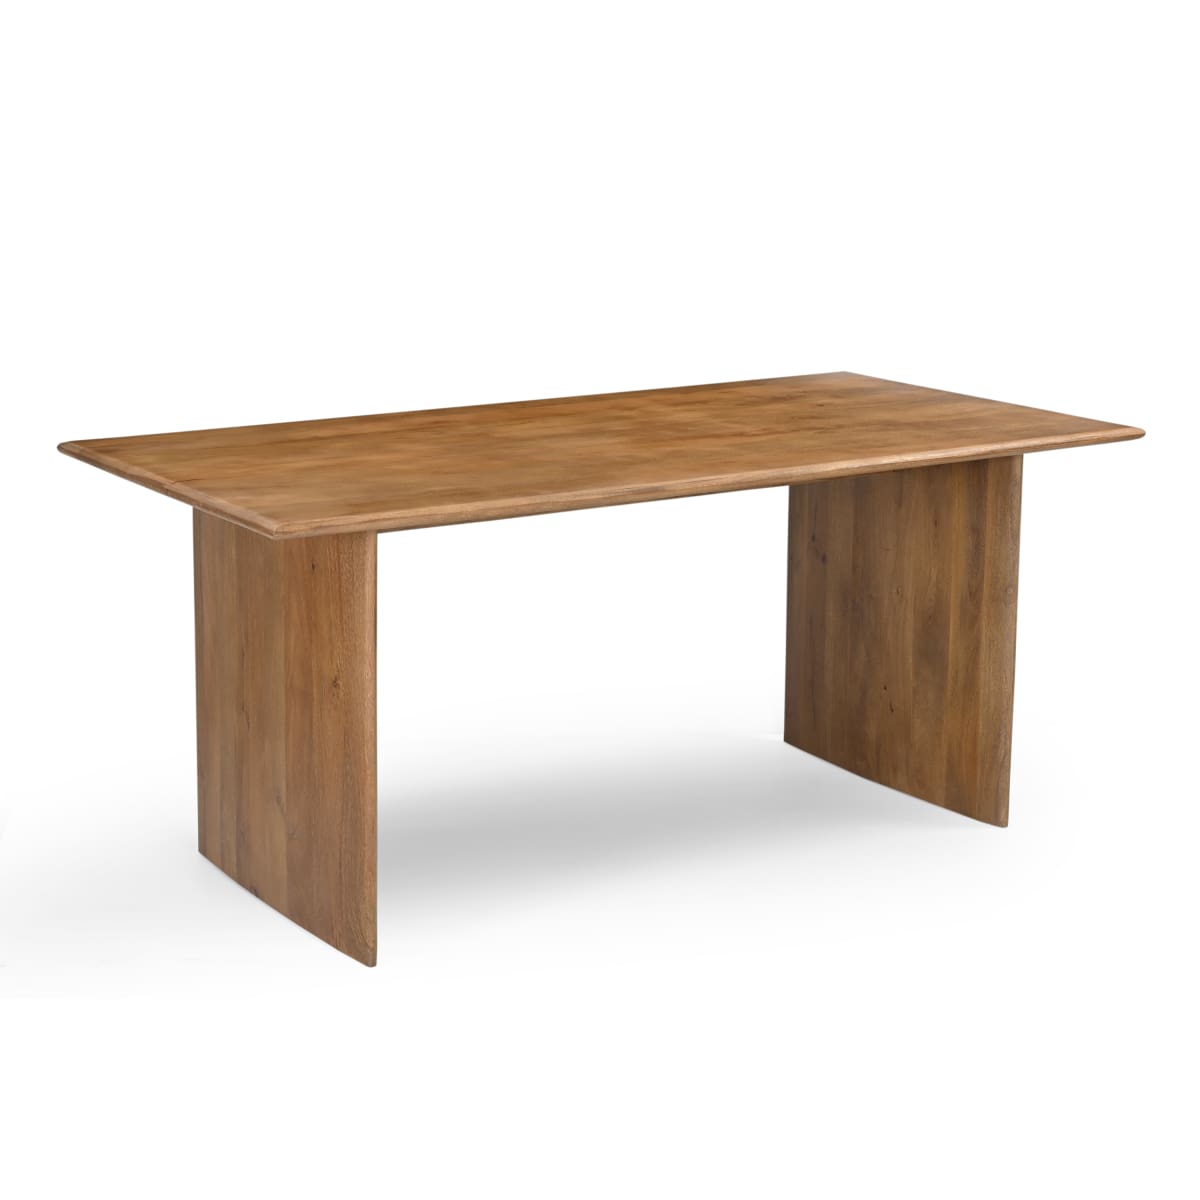 Paragon Mango Wood Dining Table - 71*36*30 - dining-table